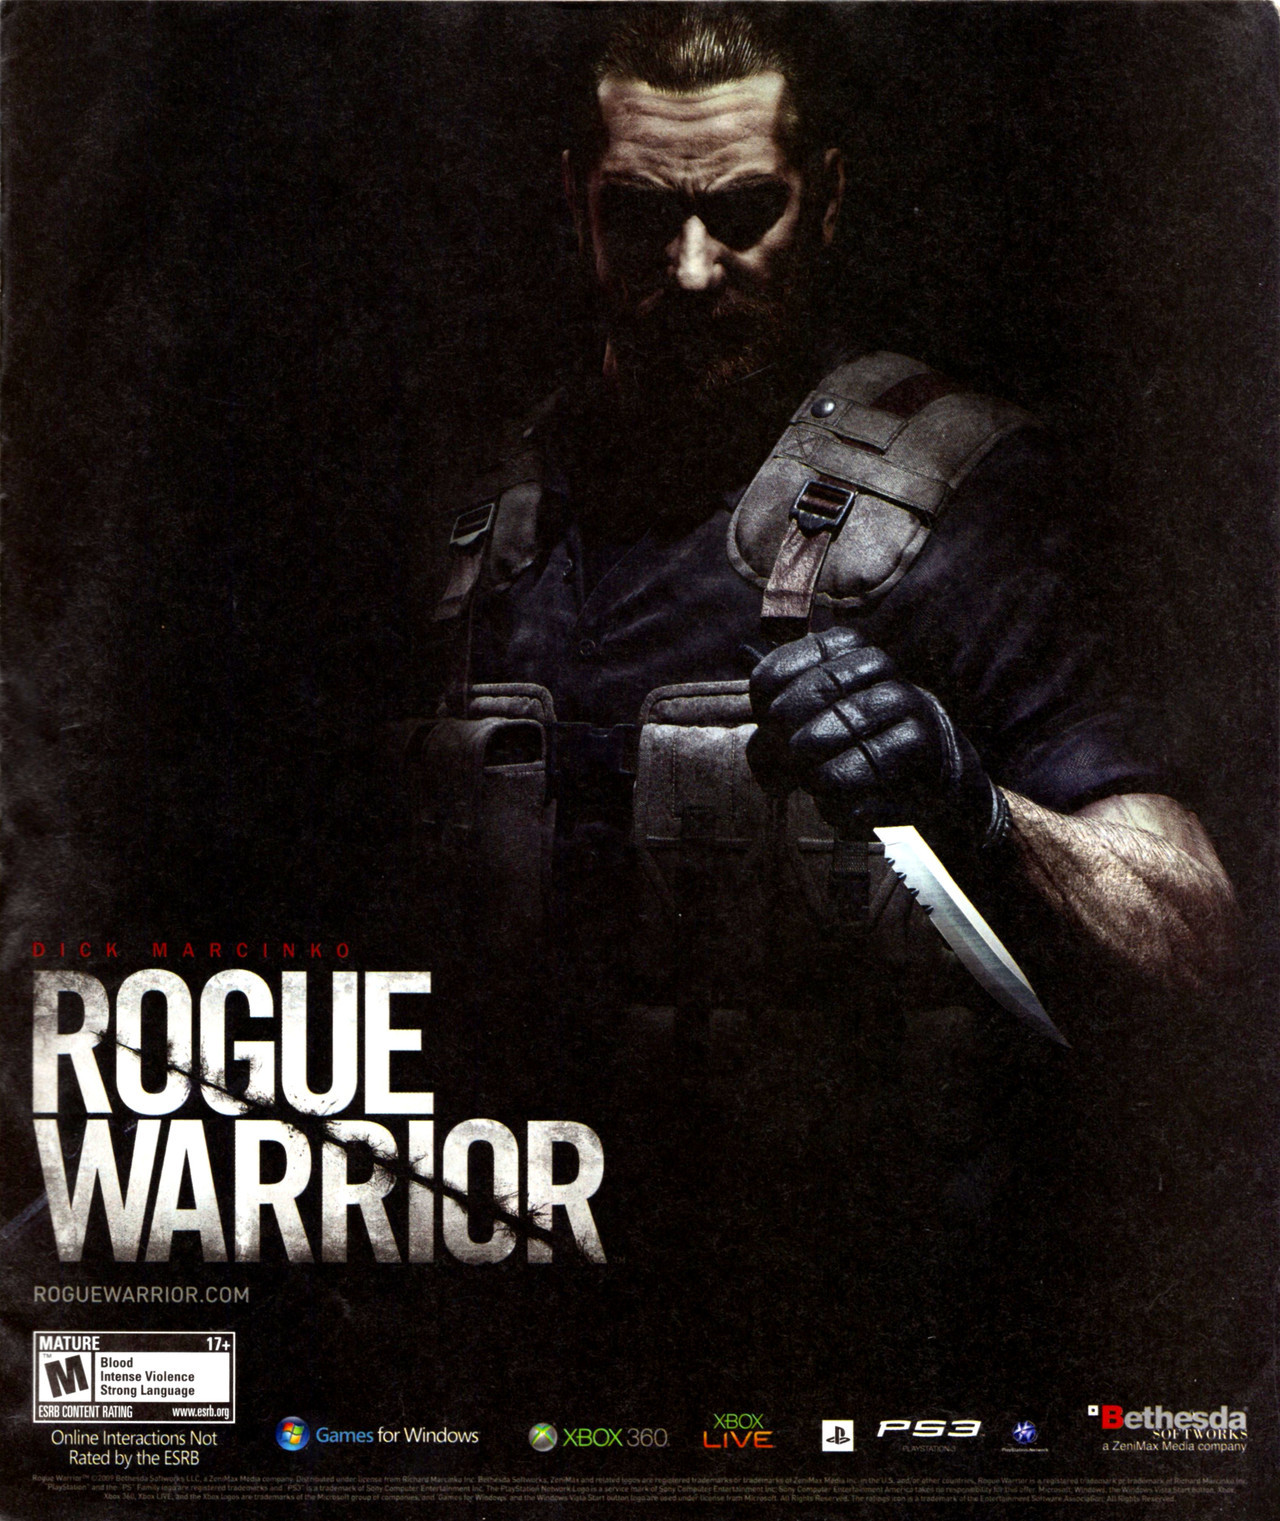 ‘Dick Marcinko: Rogue Warrior’[PC / PS3 / X360] [USA] [MAGAZINE] [2009]
• Game Informer, October 2009 (#198)
• via personal collection